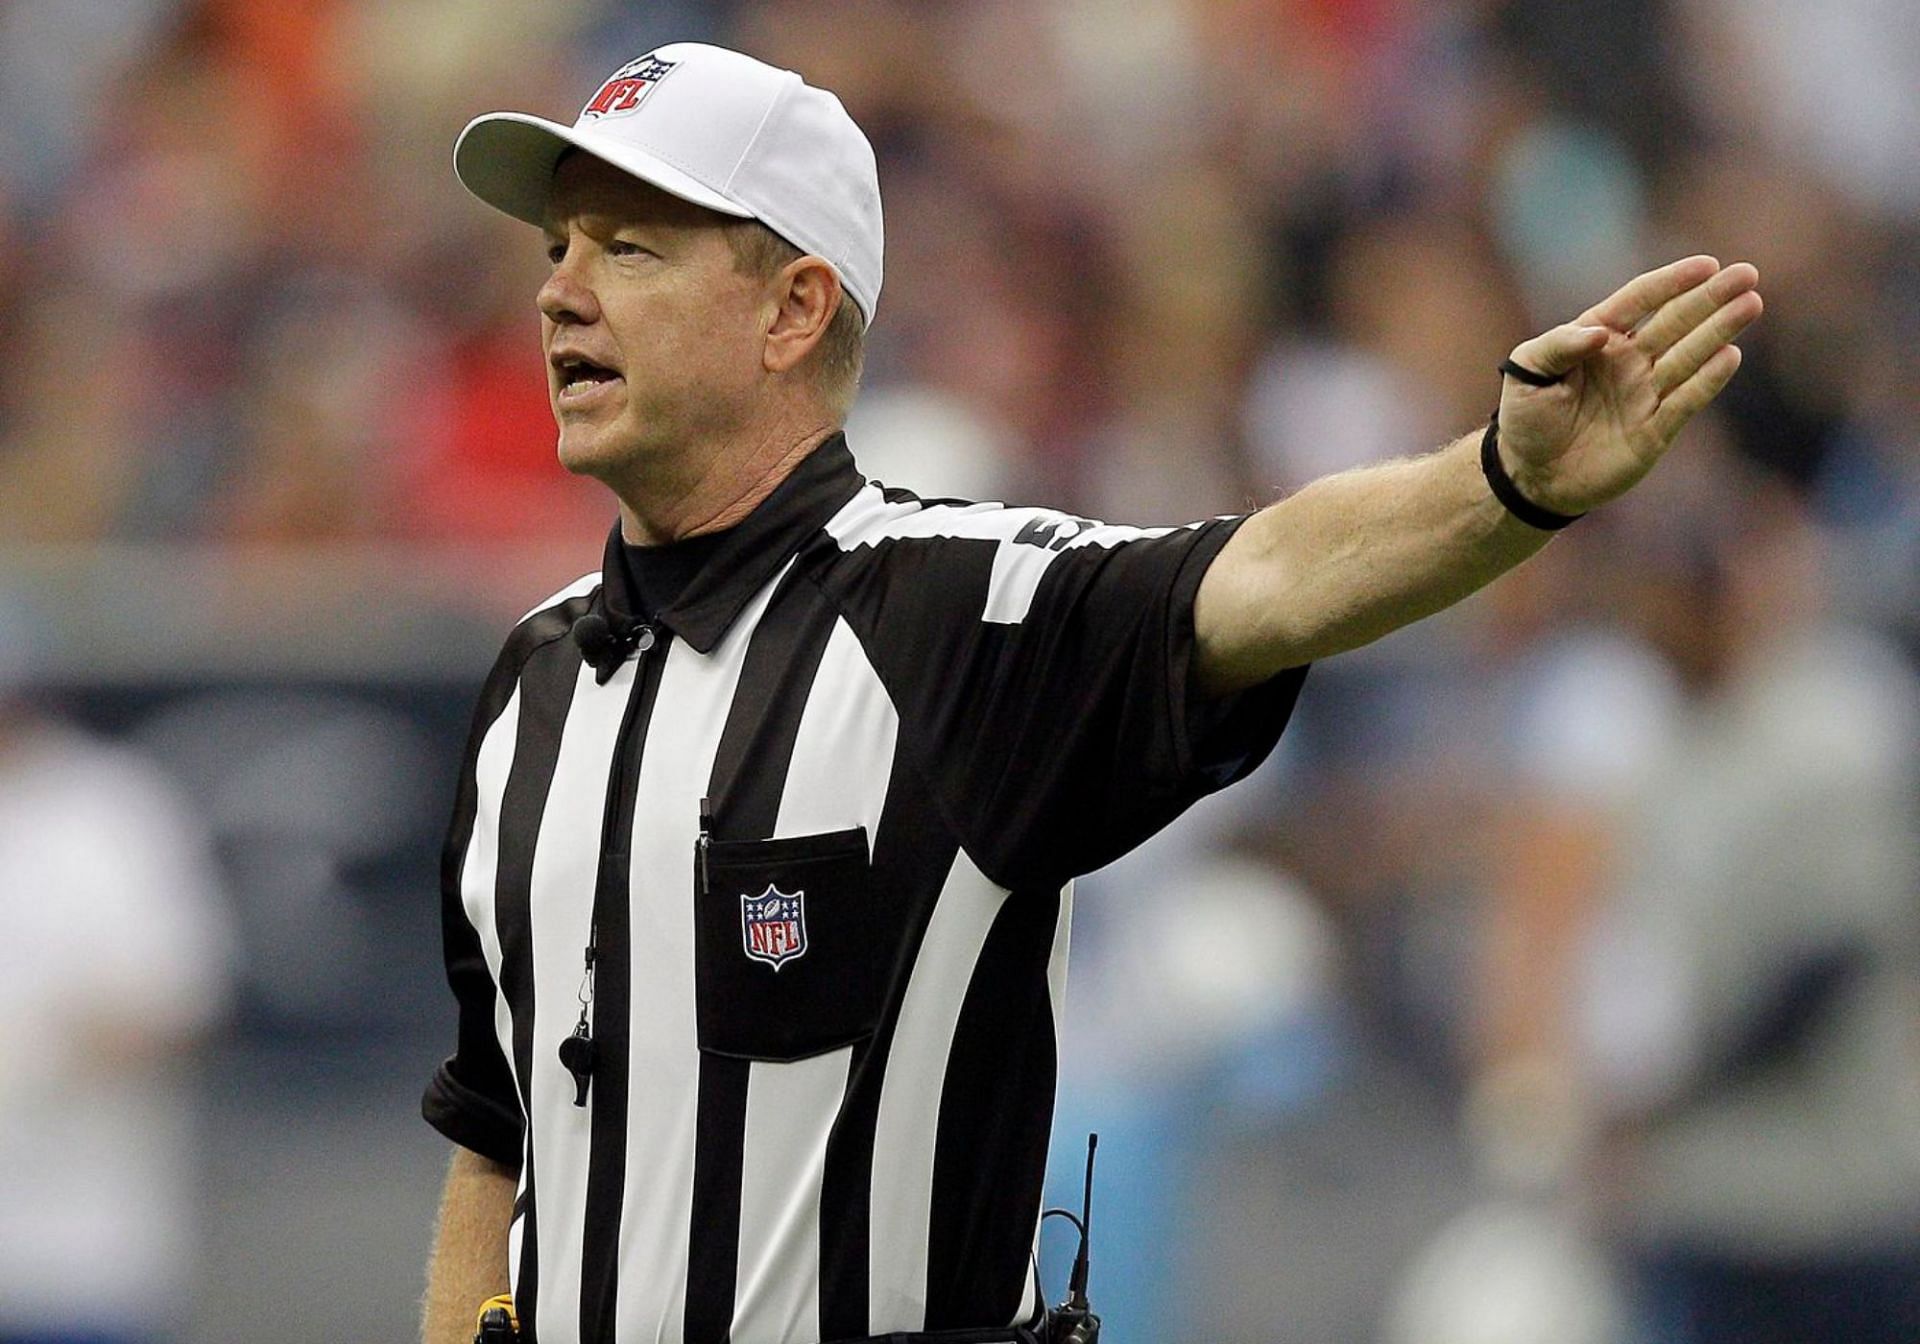 Super Bowl ref salaries: How much do Super Bowl referees make?